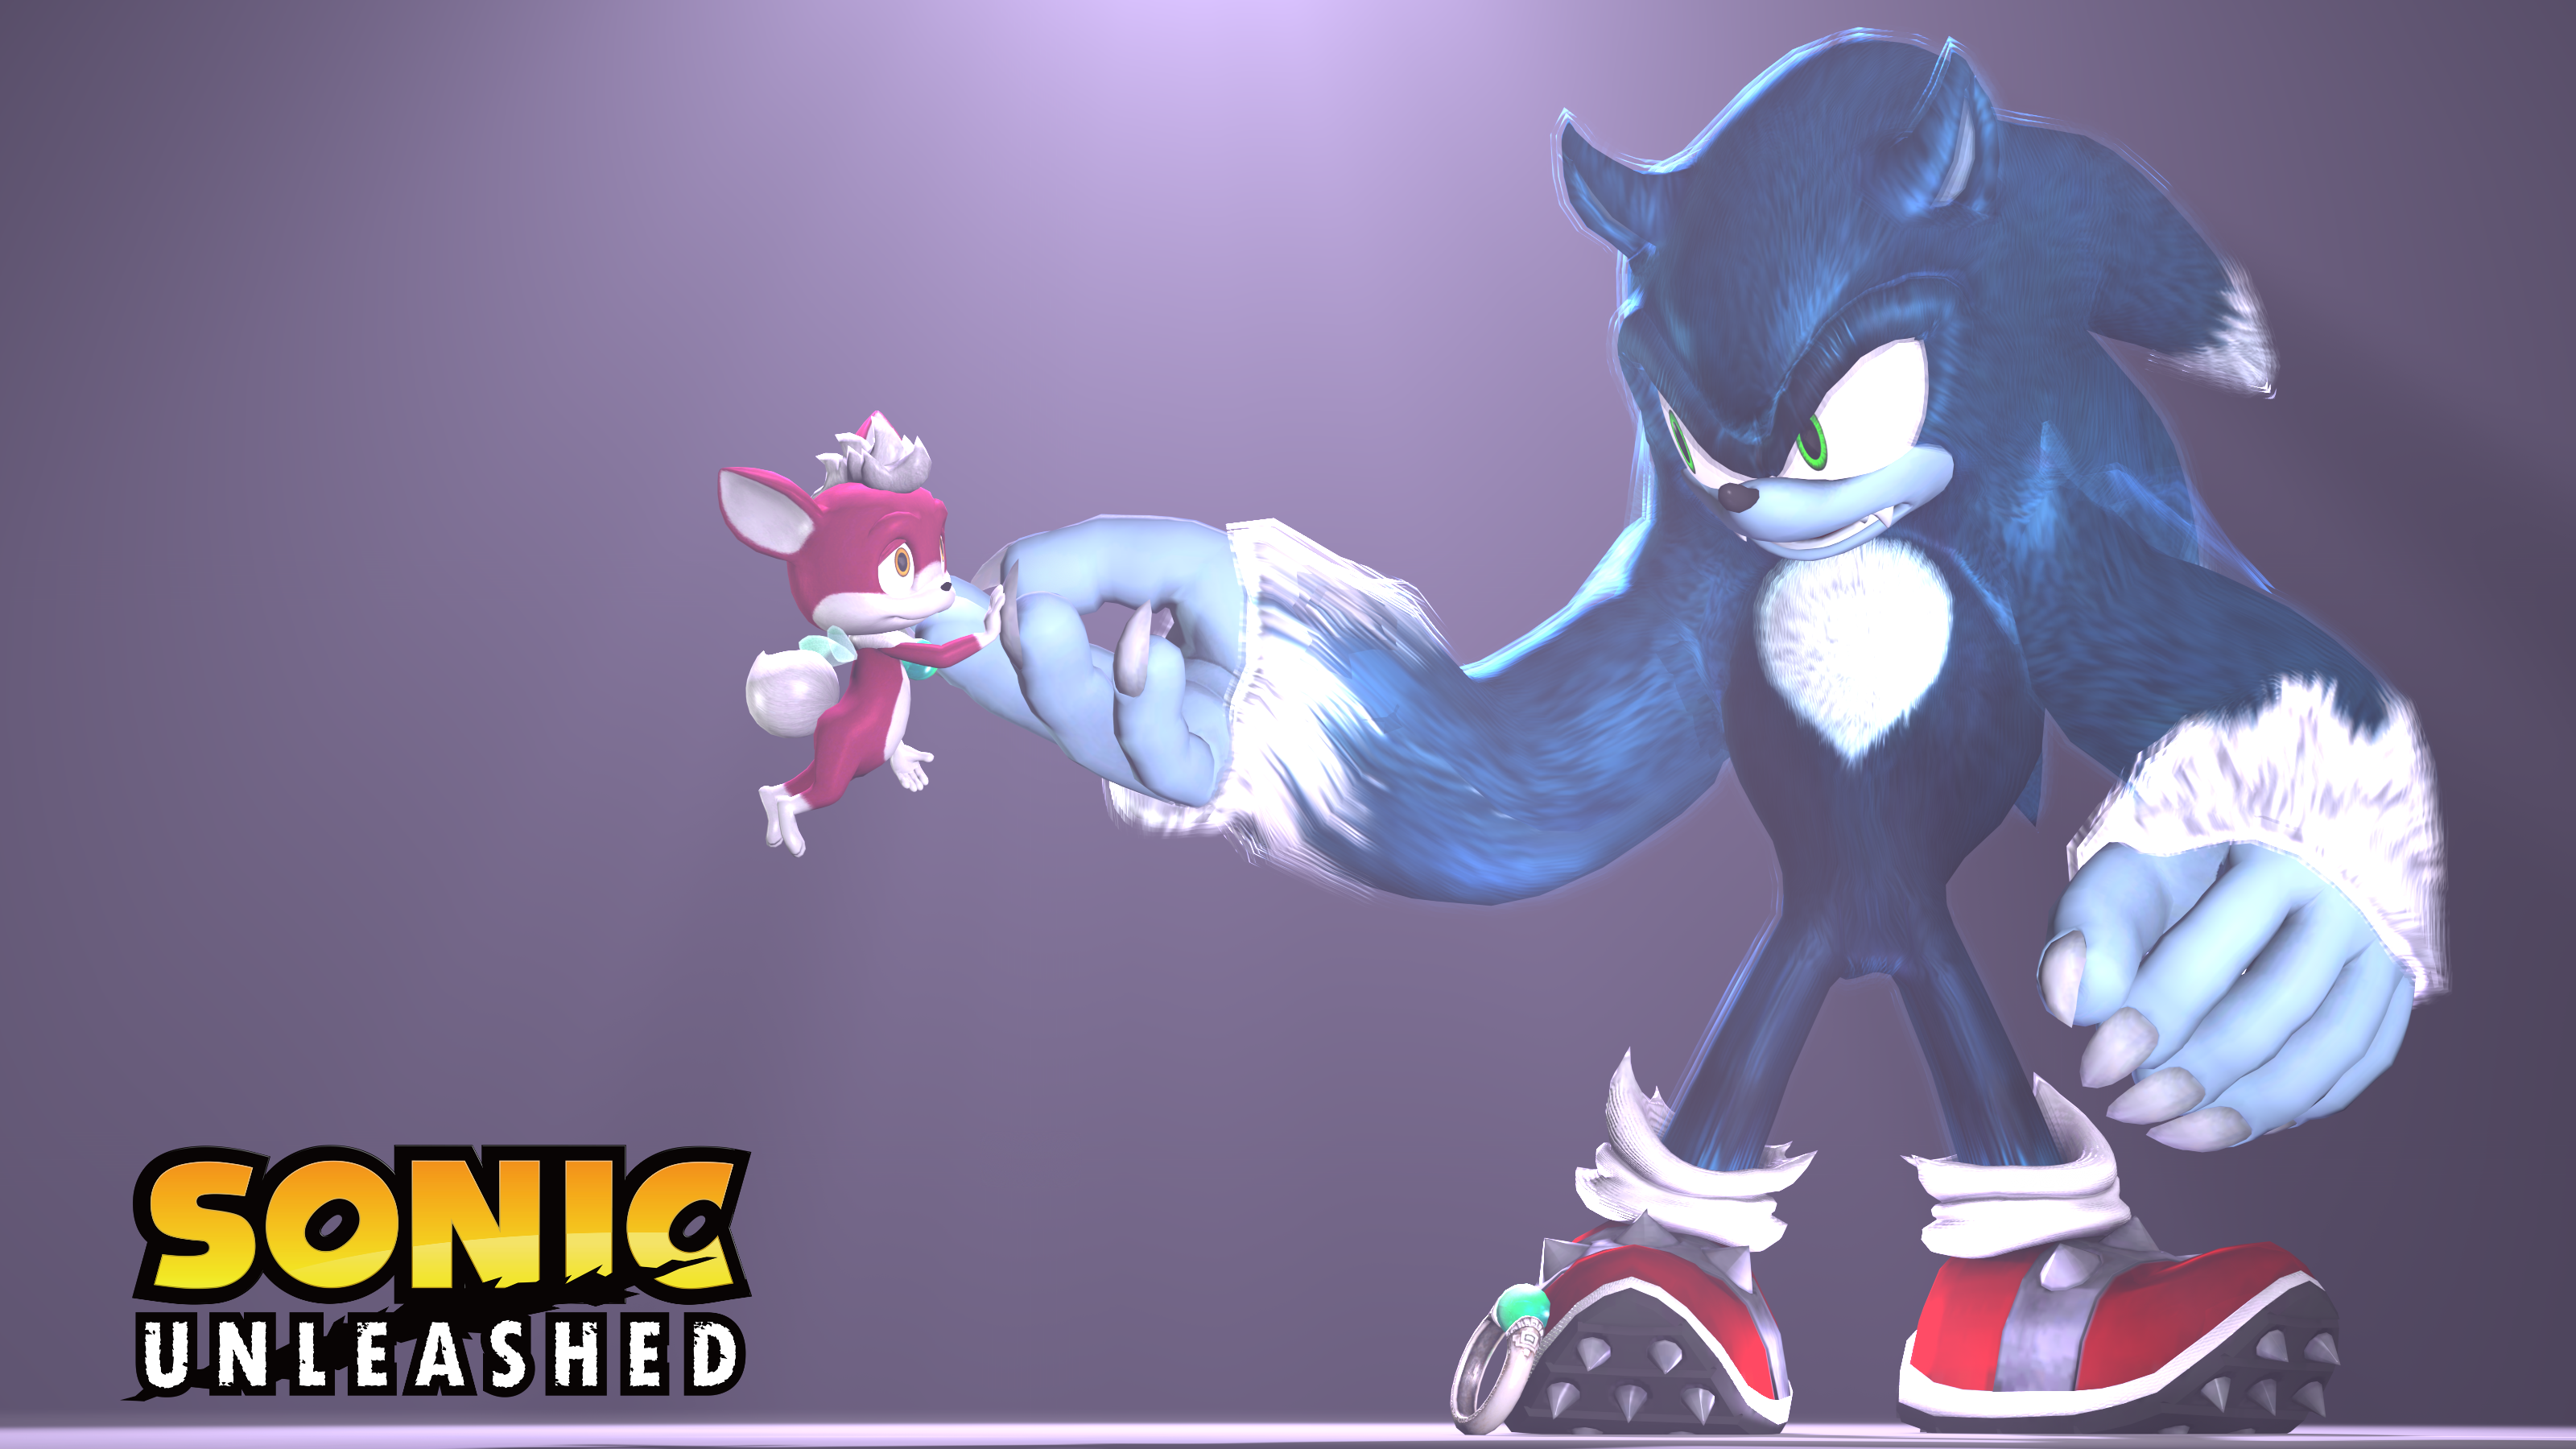 Sonic Unleashed Wallpaper Night By Lunicaura106